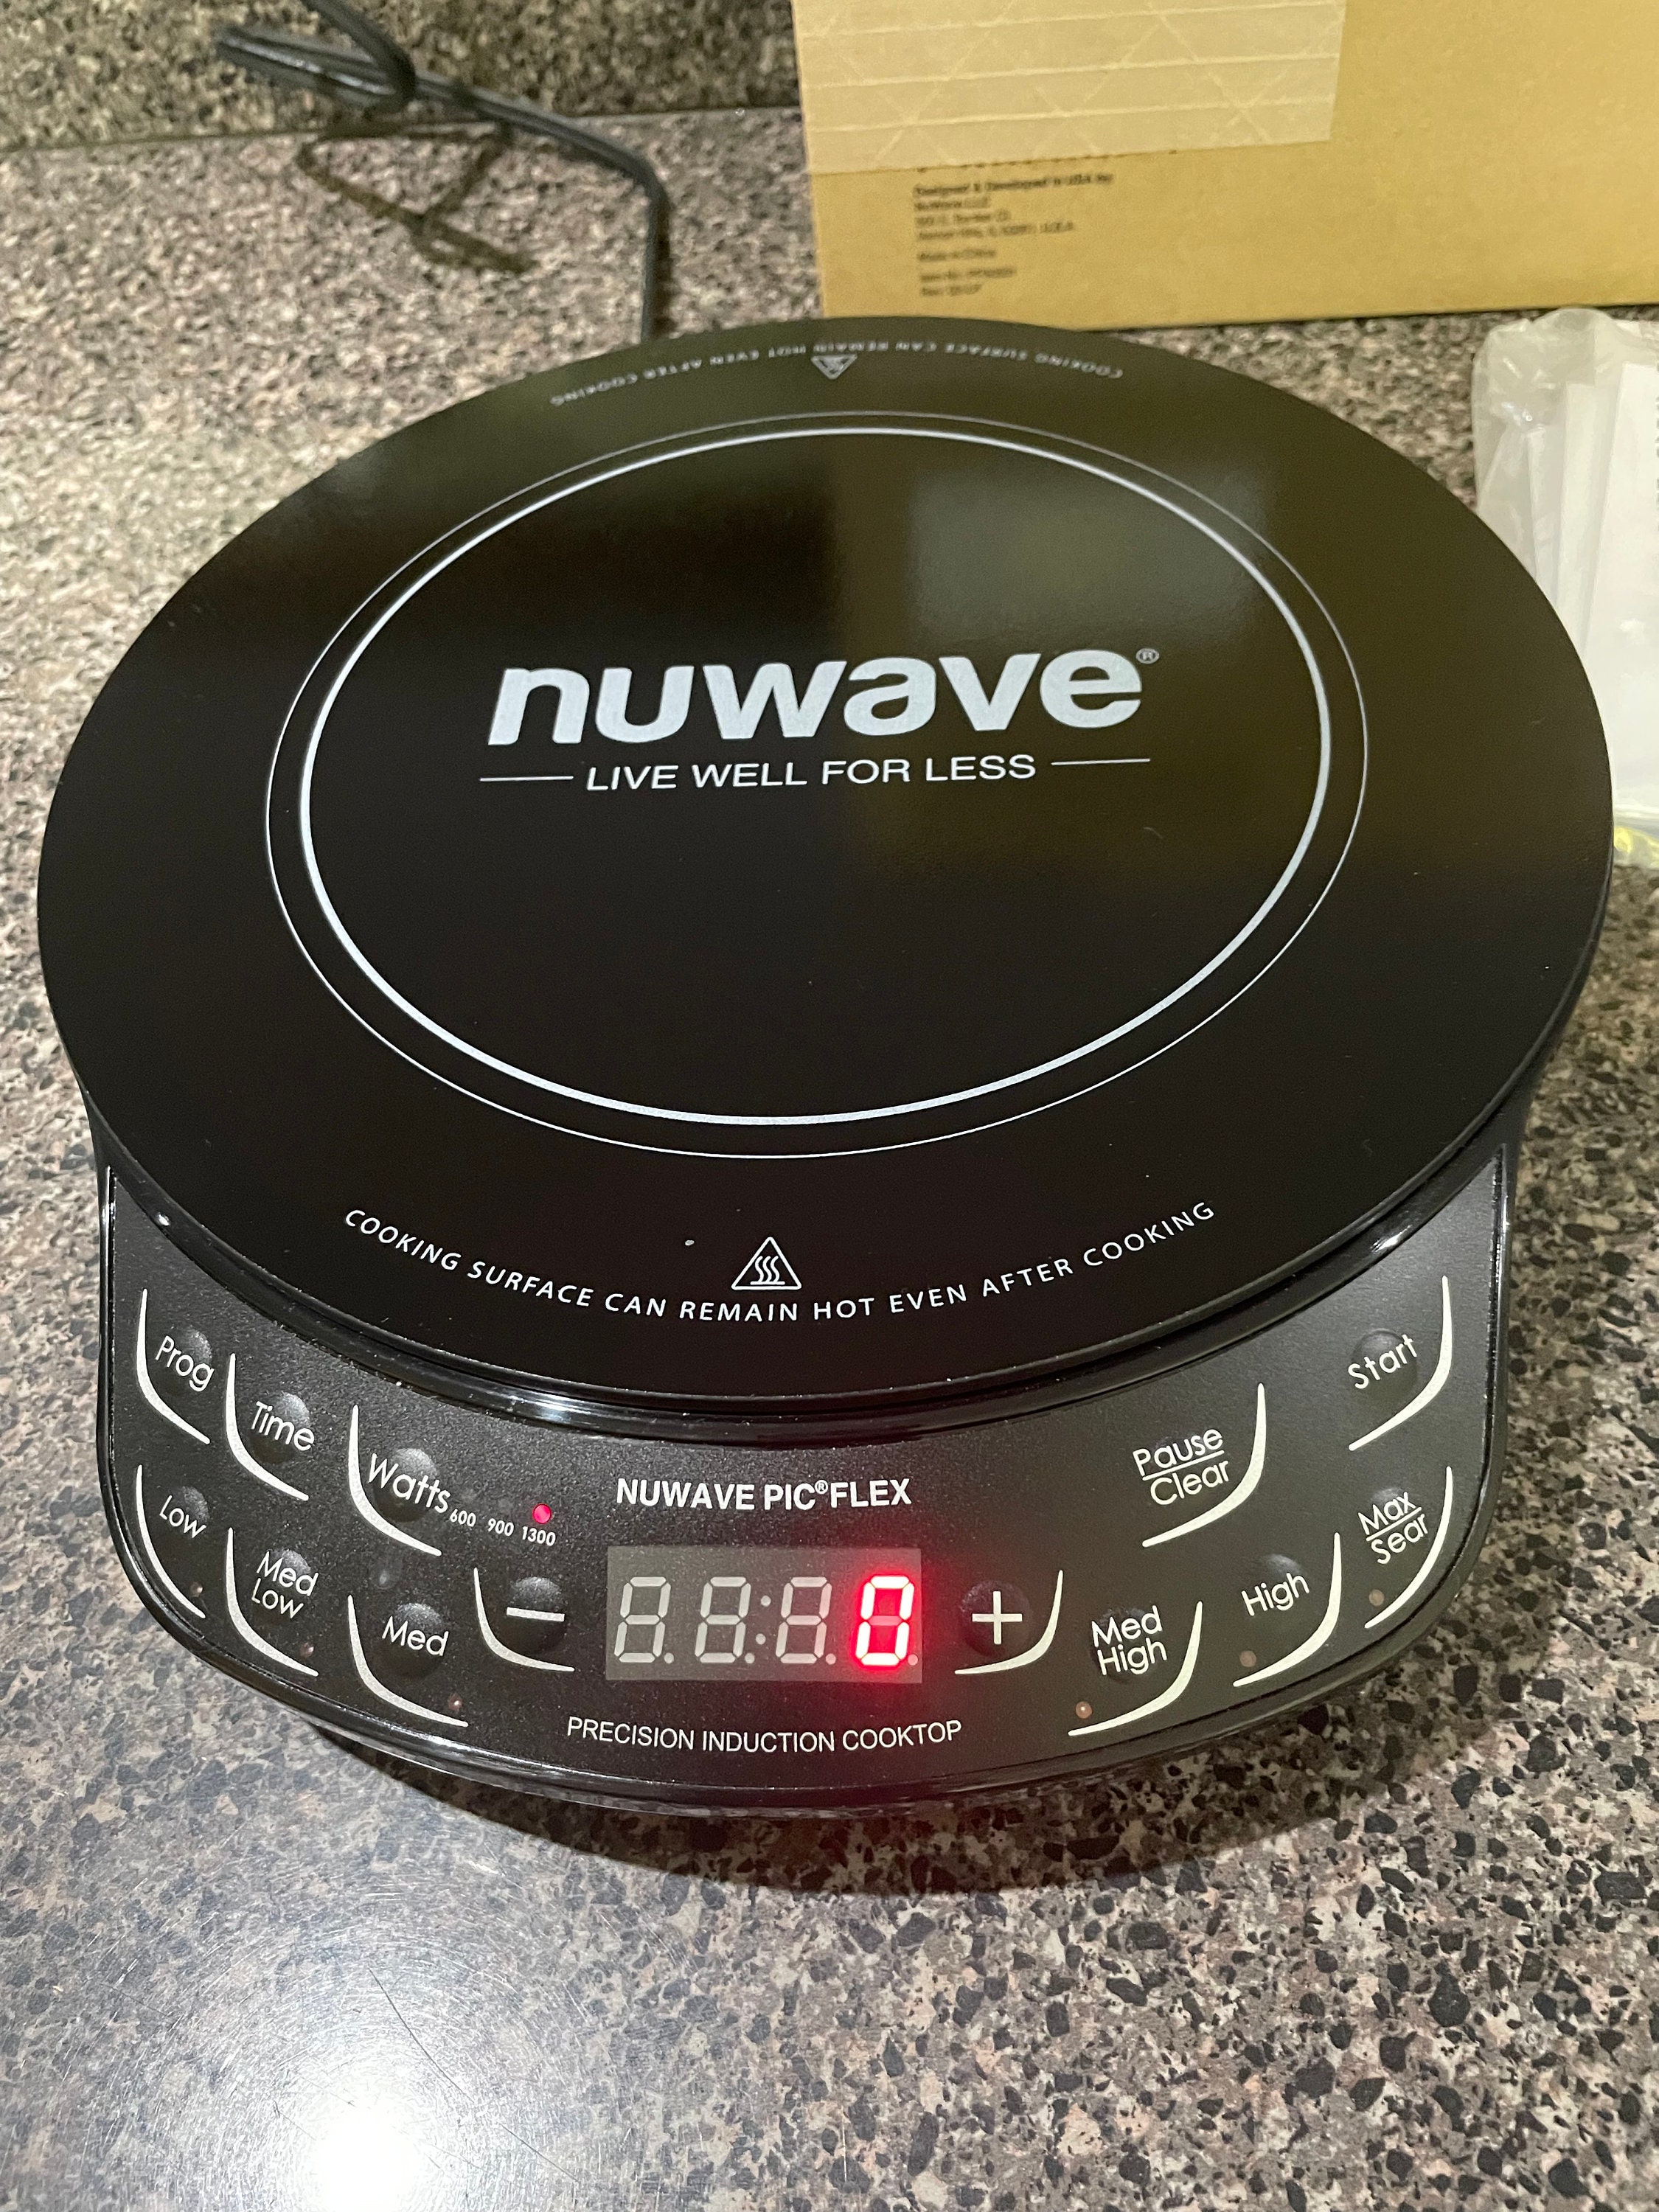 NuWave PIC Flex Precision Induction Cooktop with 9 Fry Pan